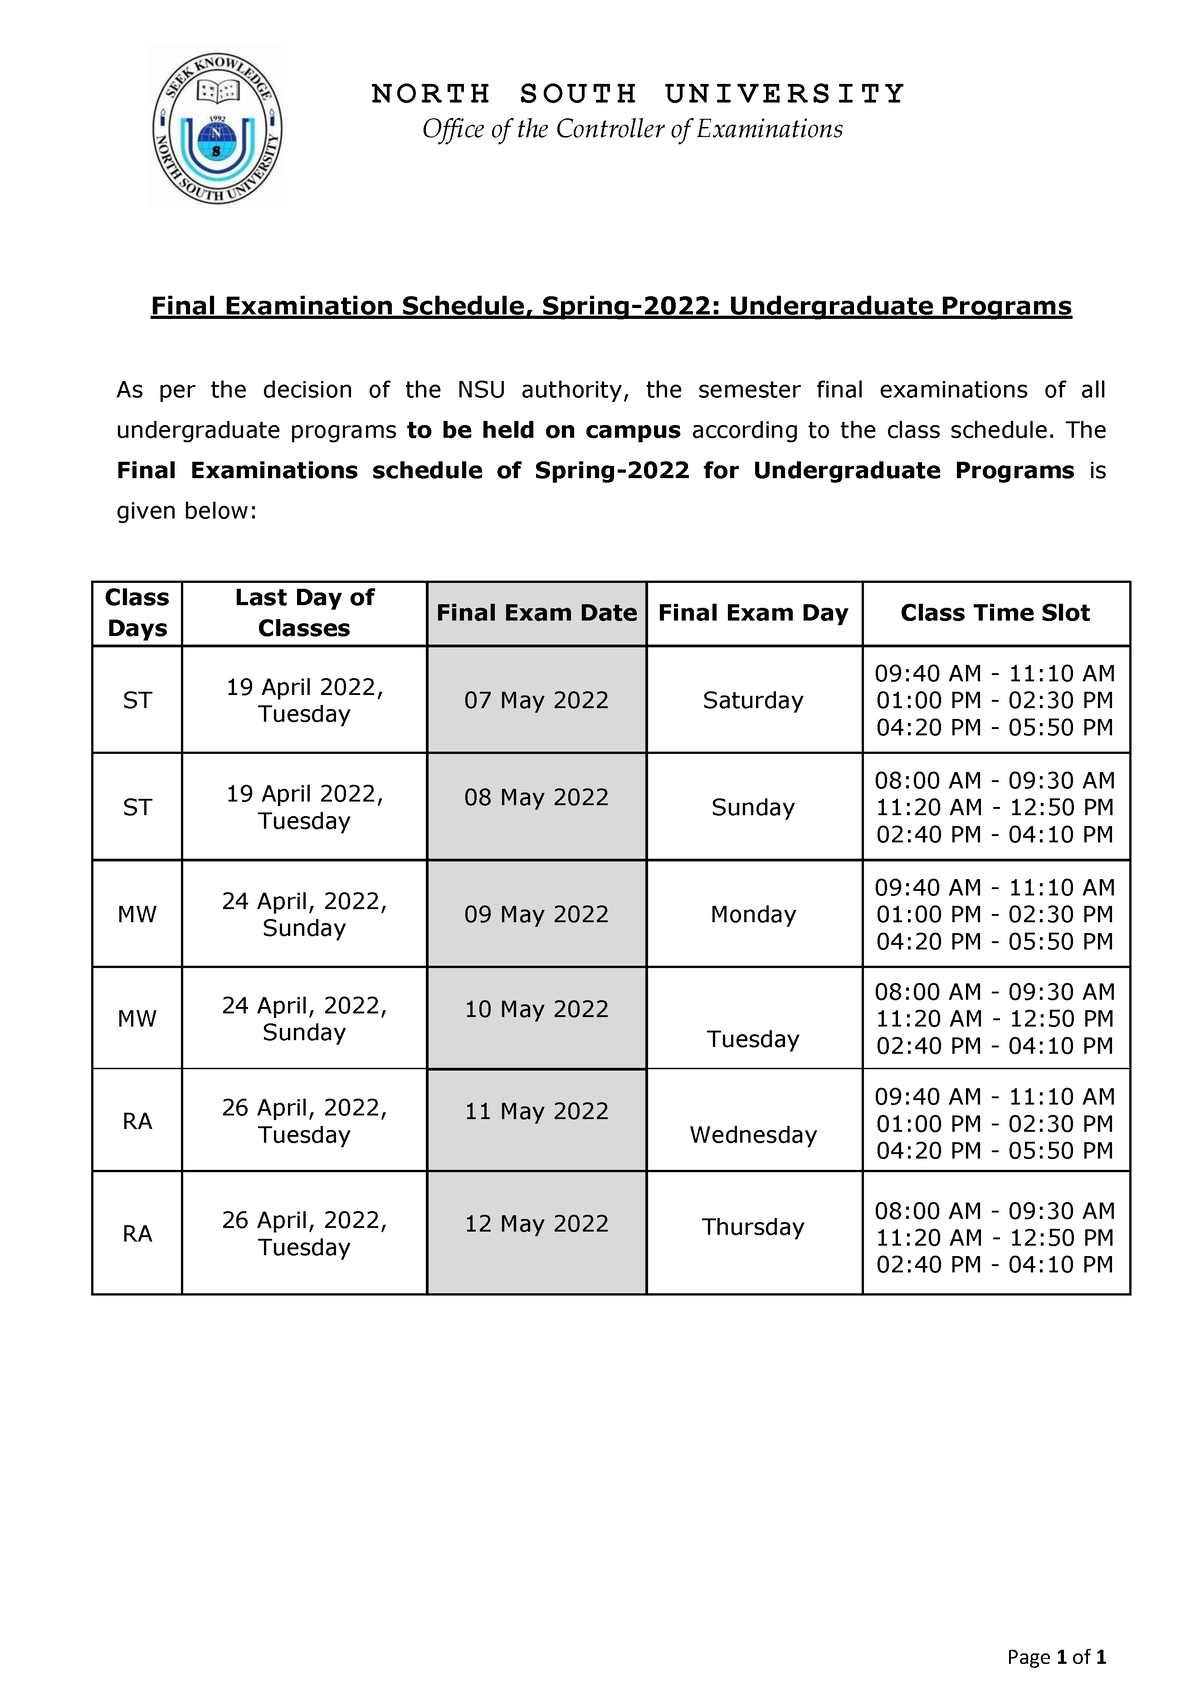 597.Final Exam Schedule Spring2022 IT NORTH SOUTH UNIVERSITY